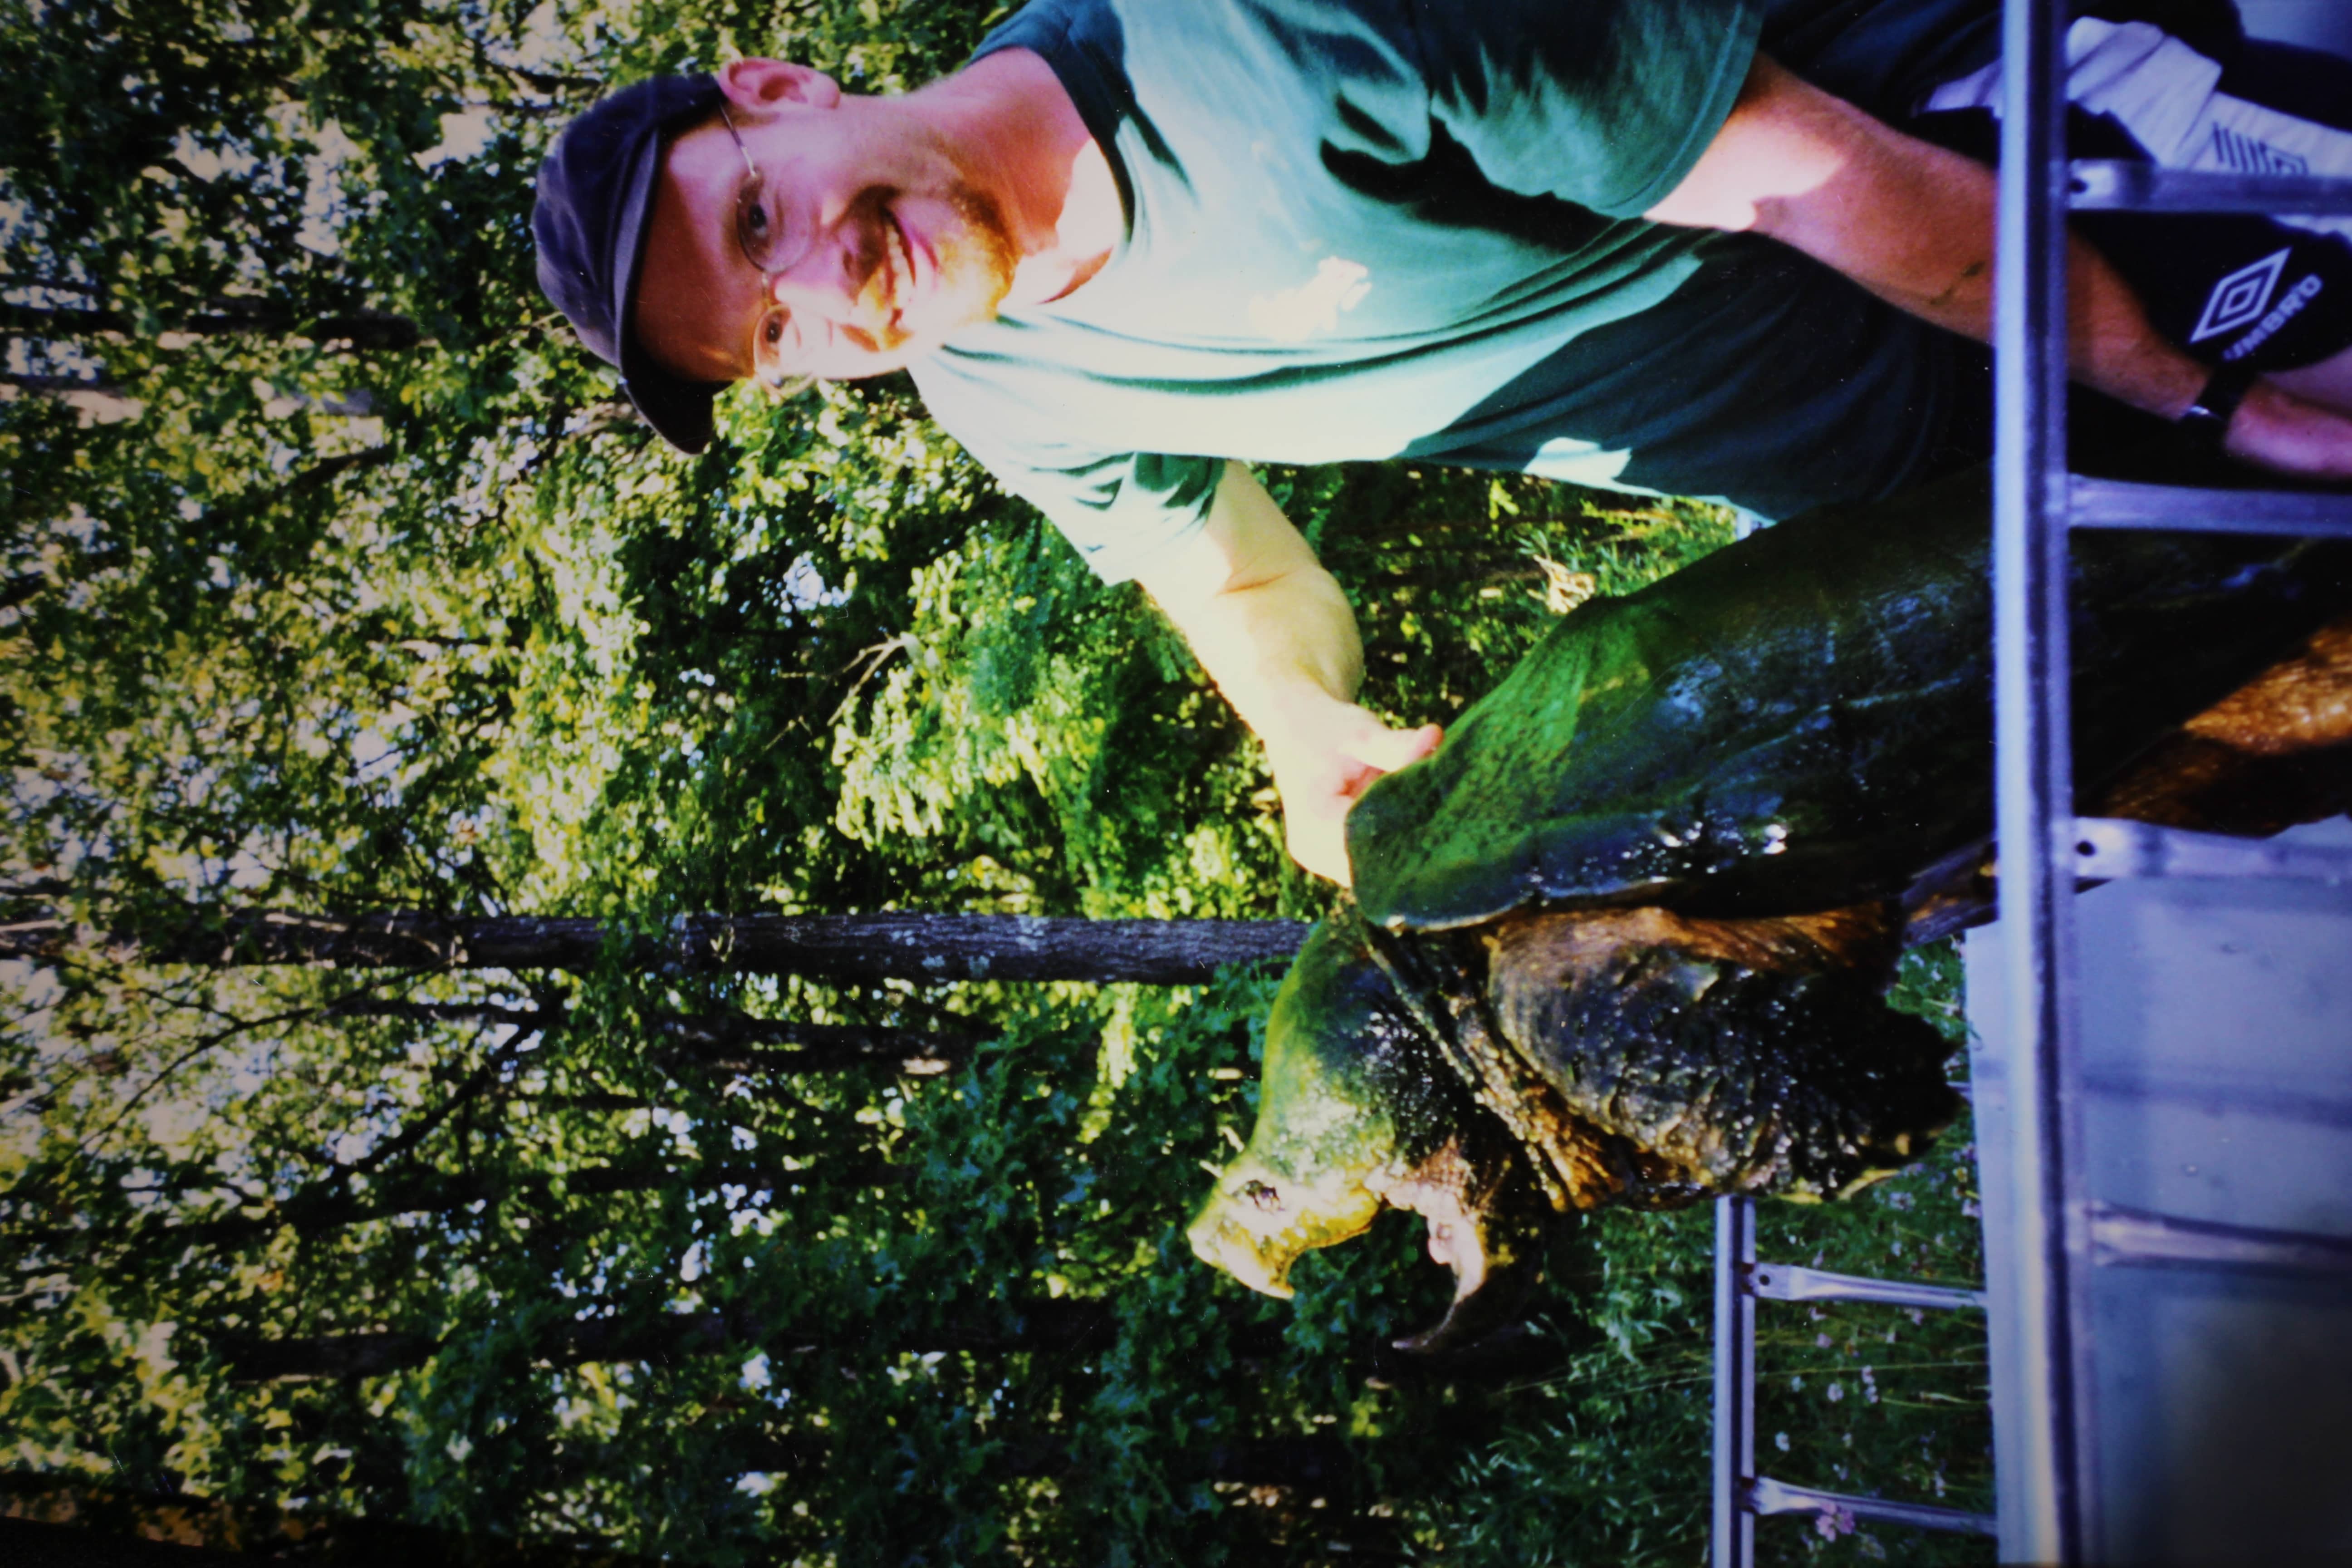 alligator snapping turtle picture